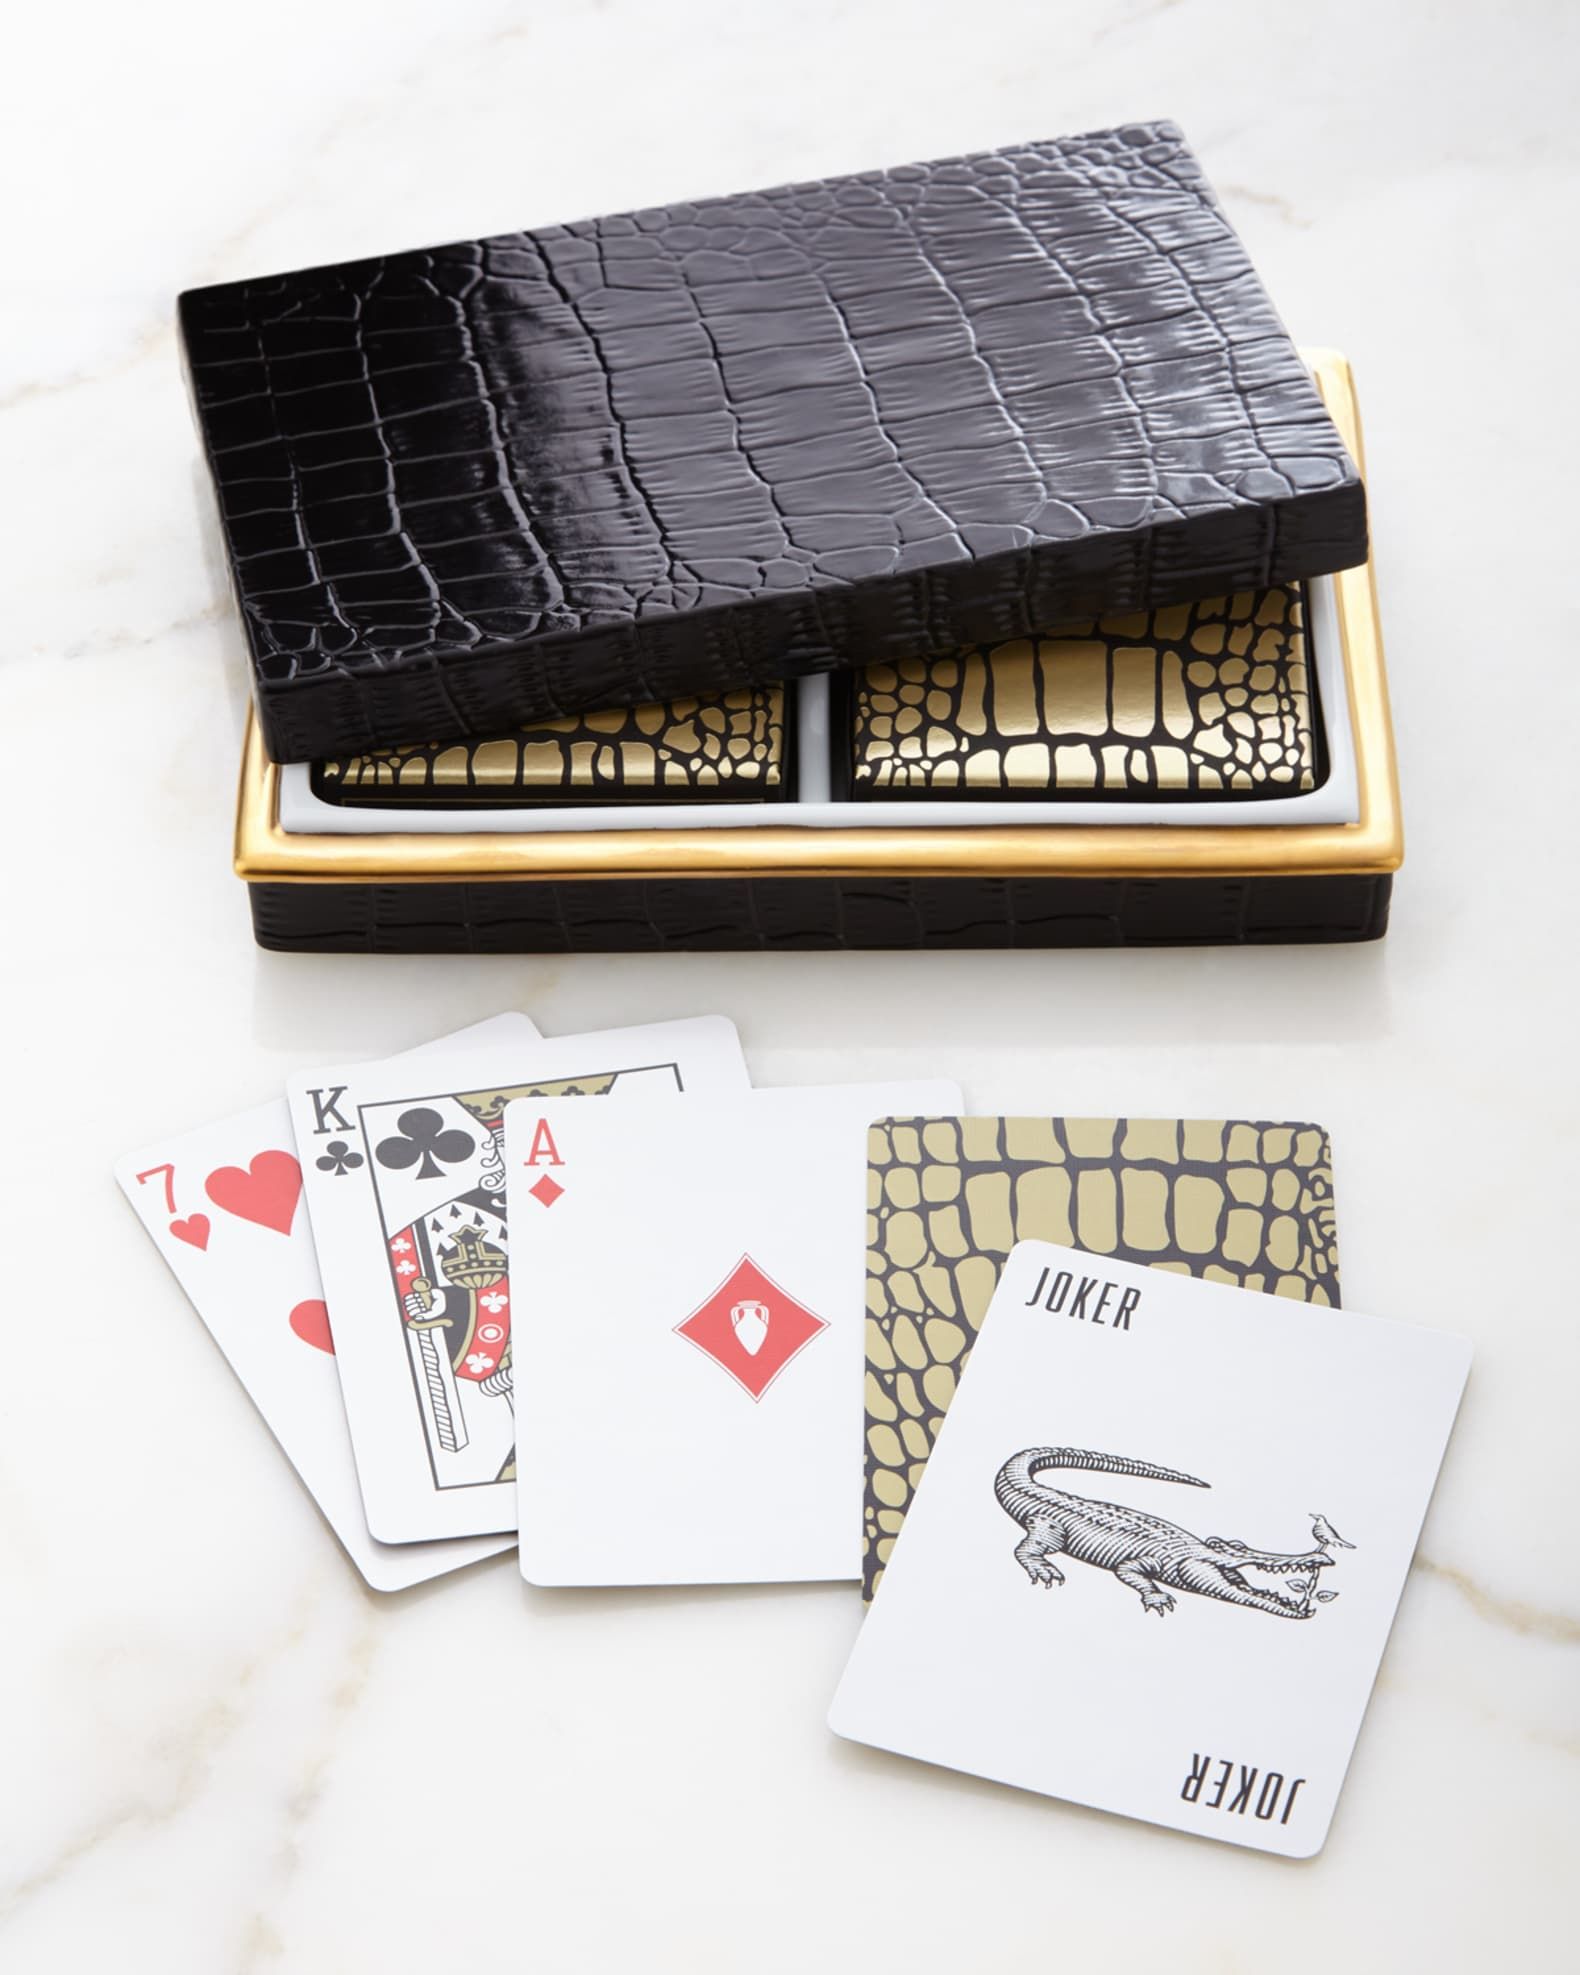 Crocodile-Embossed Box with Playing Cards